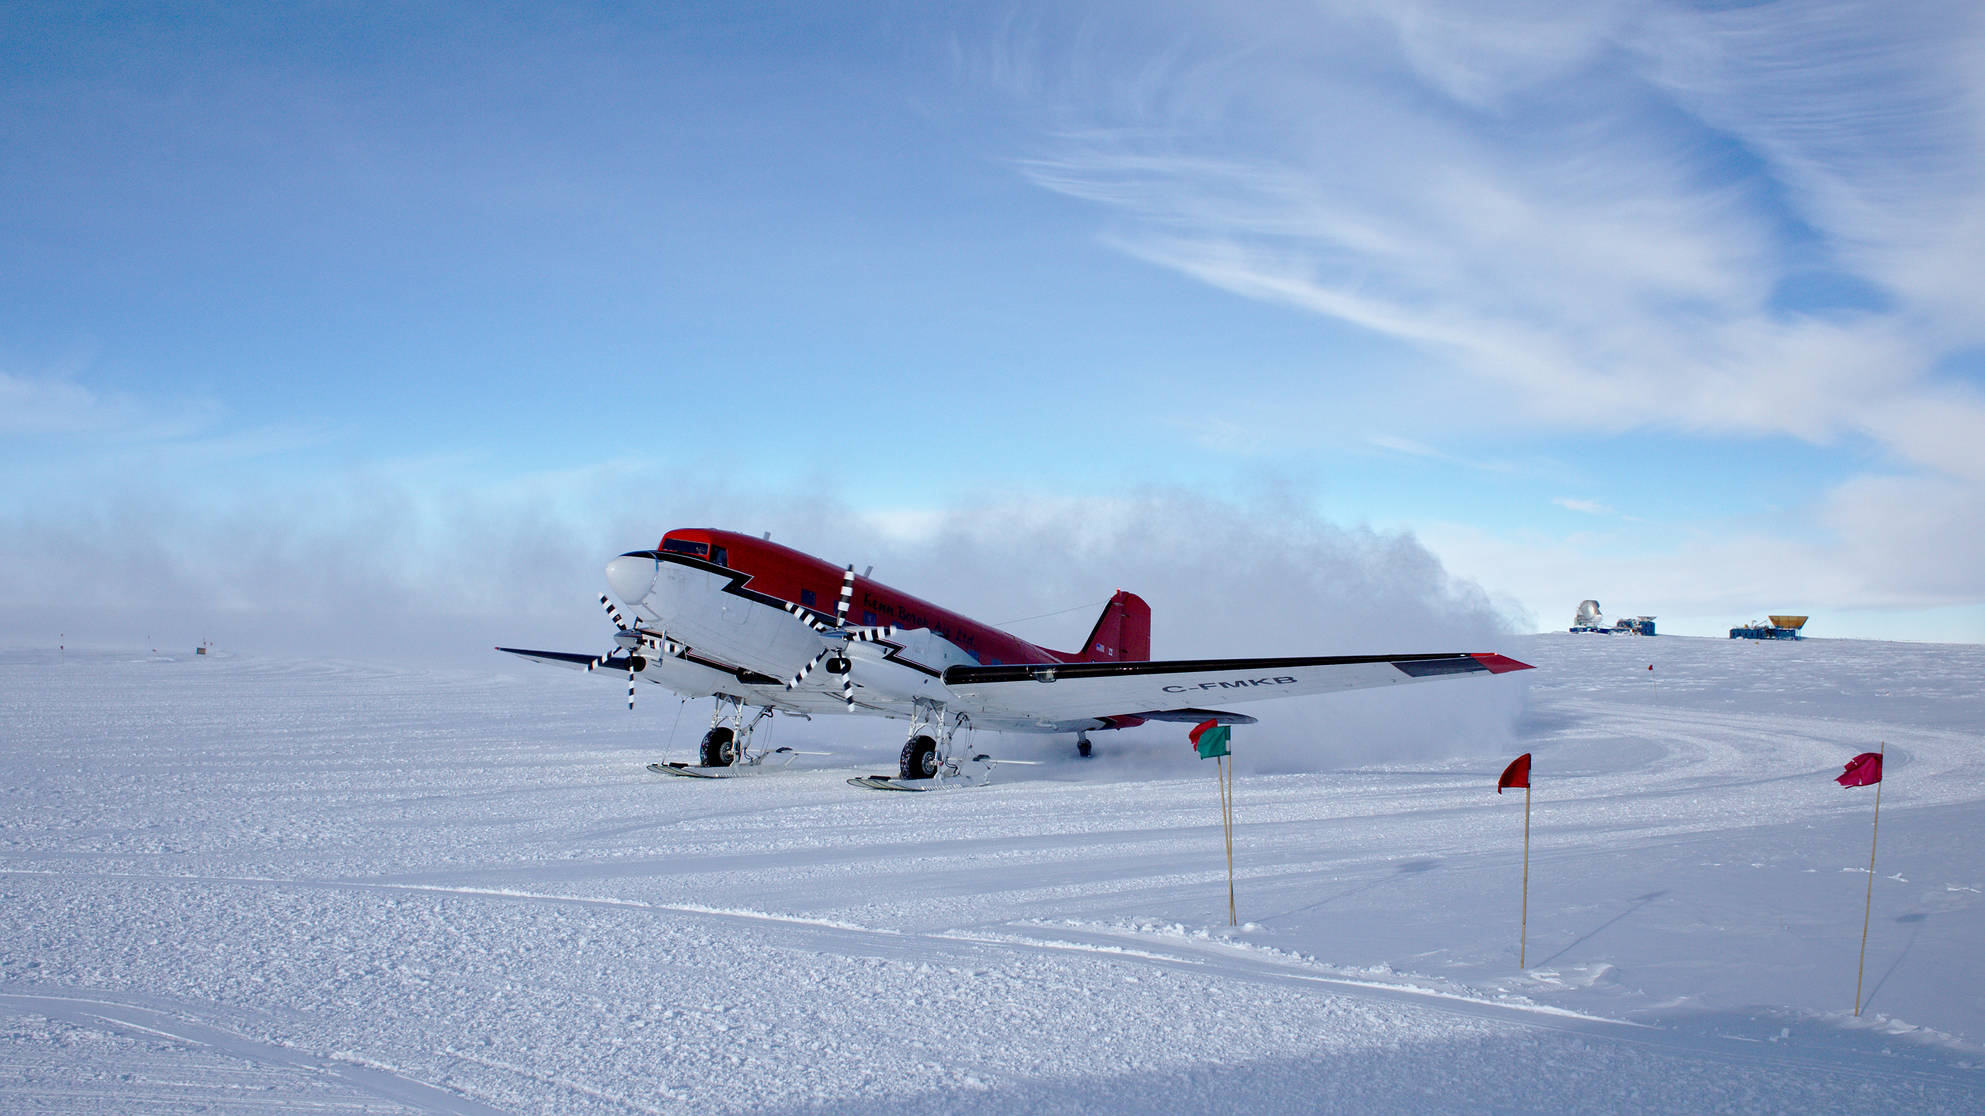 Basler arriving at south pole. In the background the South Pole Telescope, BICEP, and SPUD